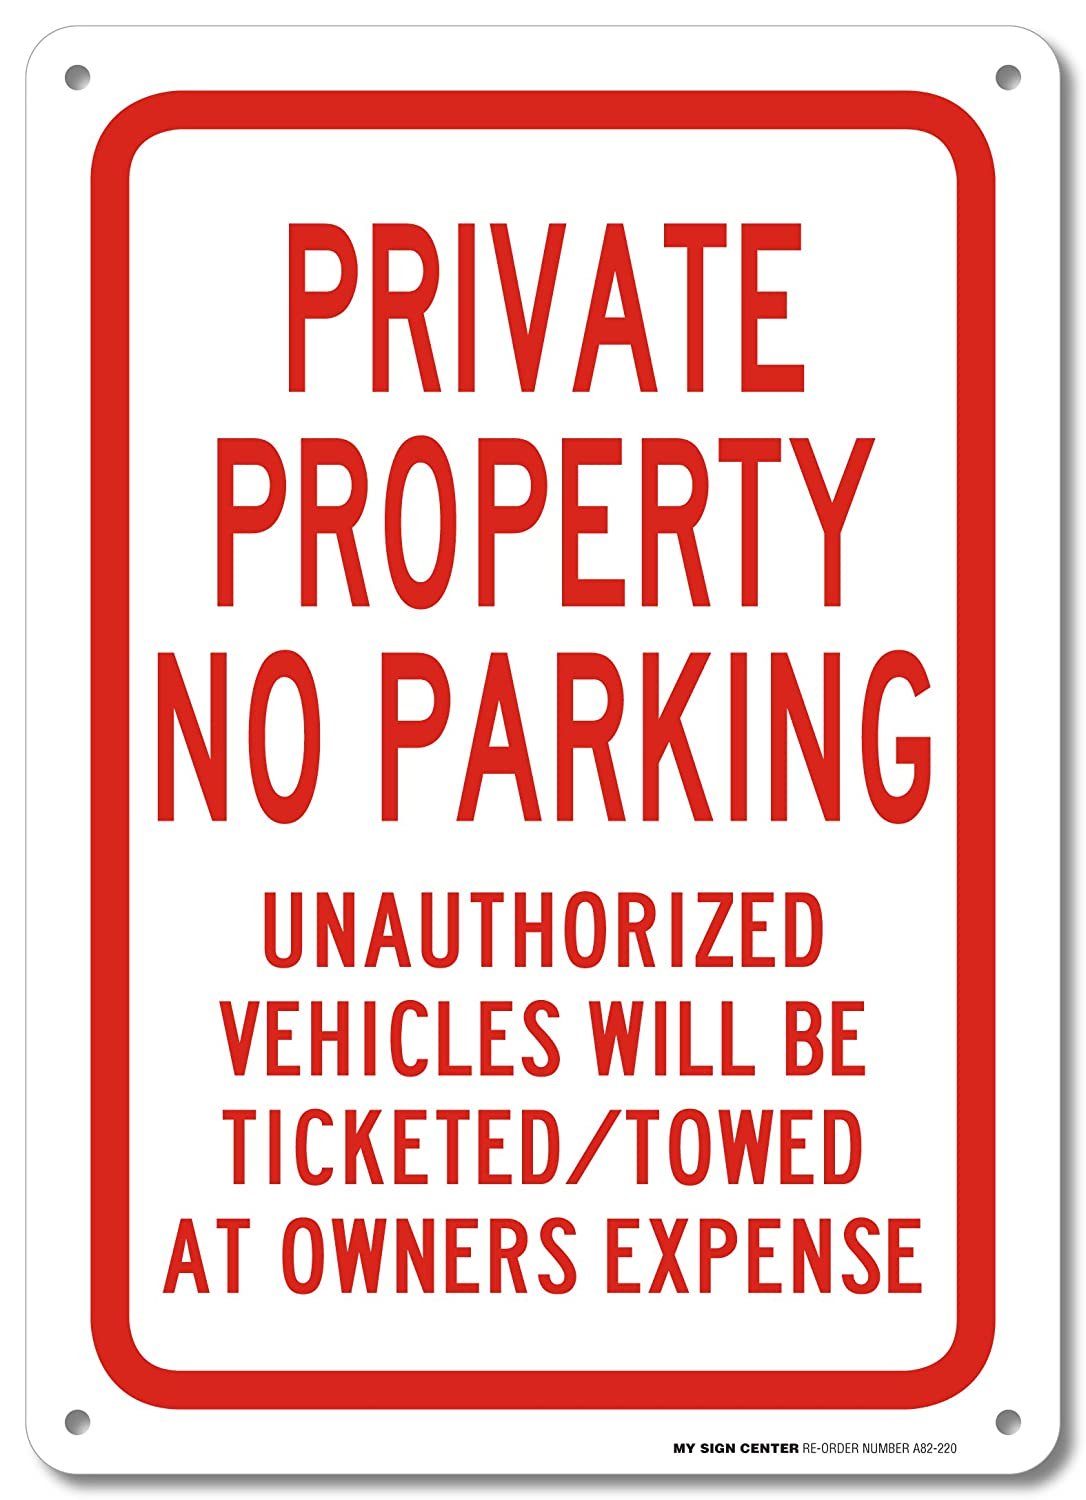 Private Property No Parking Unauthorized Vehicles Will Be Ticketed/Towed at Owner's Expense Sign